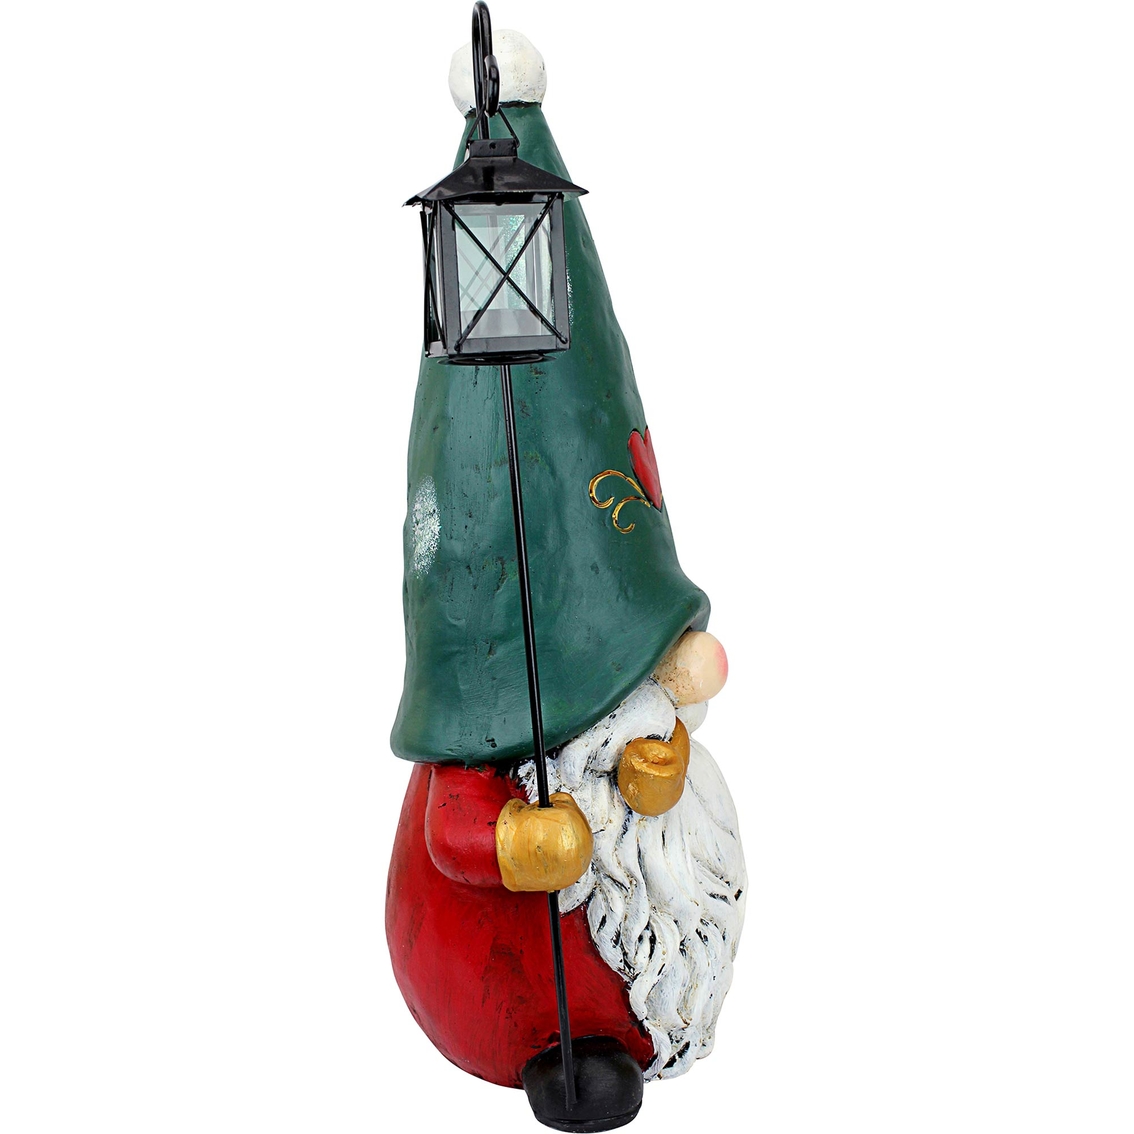 Design Toscano Moe the North Pole Gnome Holiday Statue - Image 2 of 4